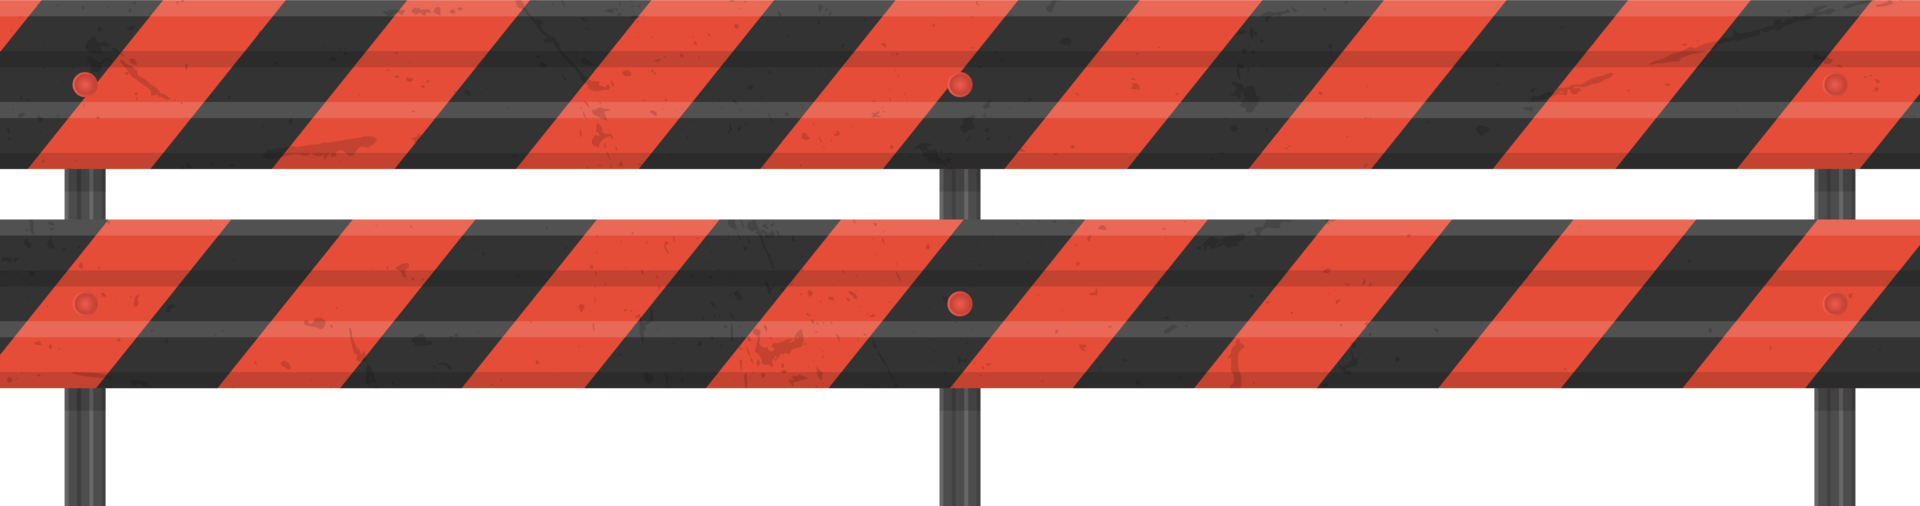 guardrail stradale, barriera in acciaio autostradale png